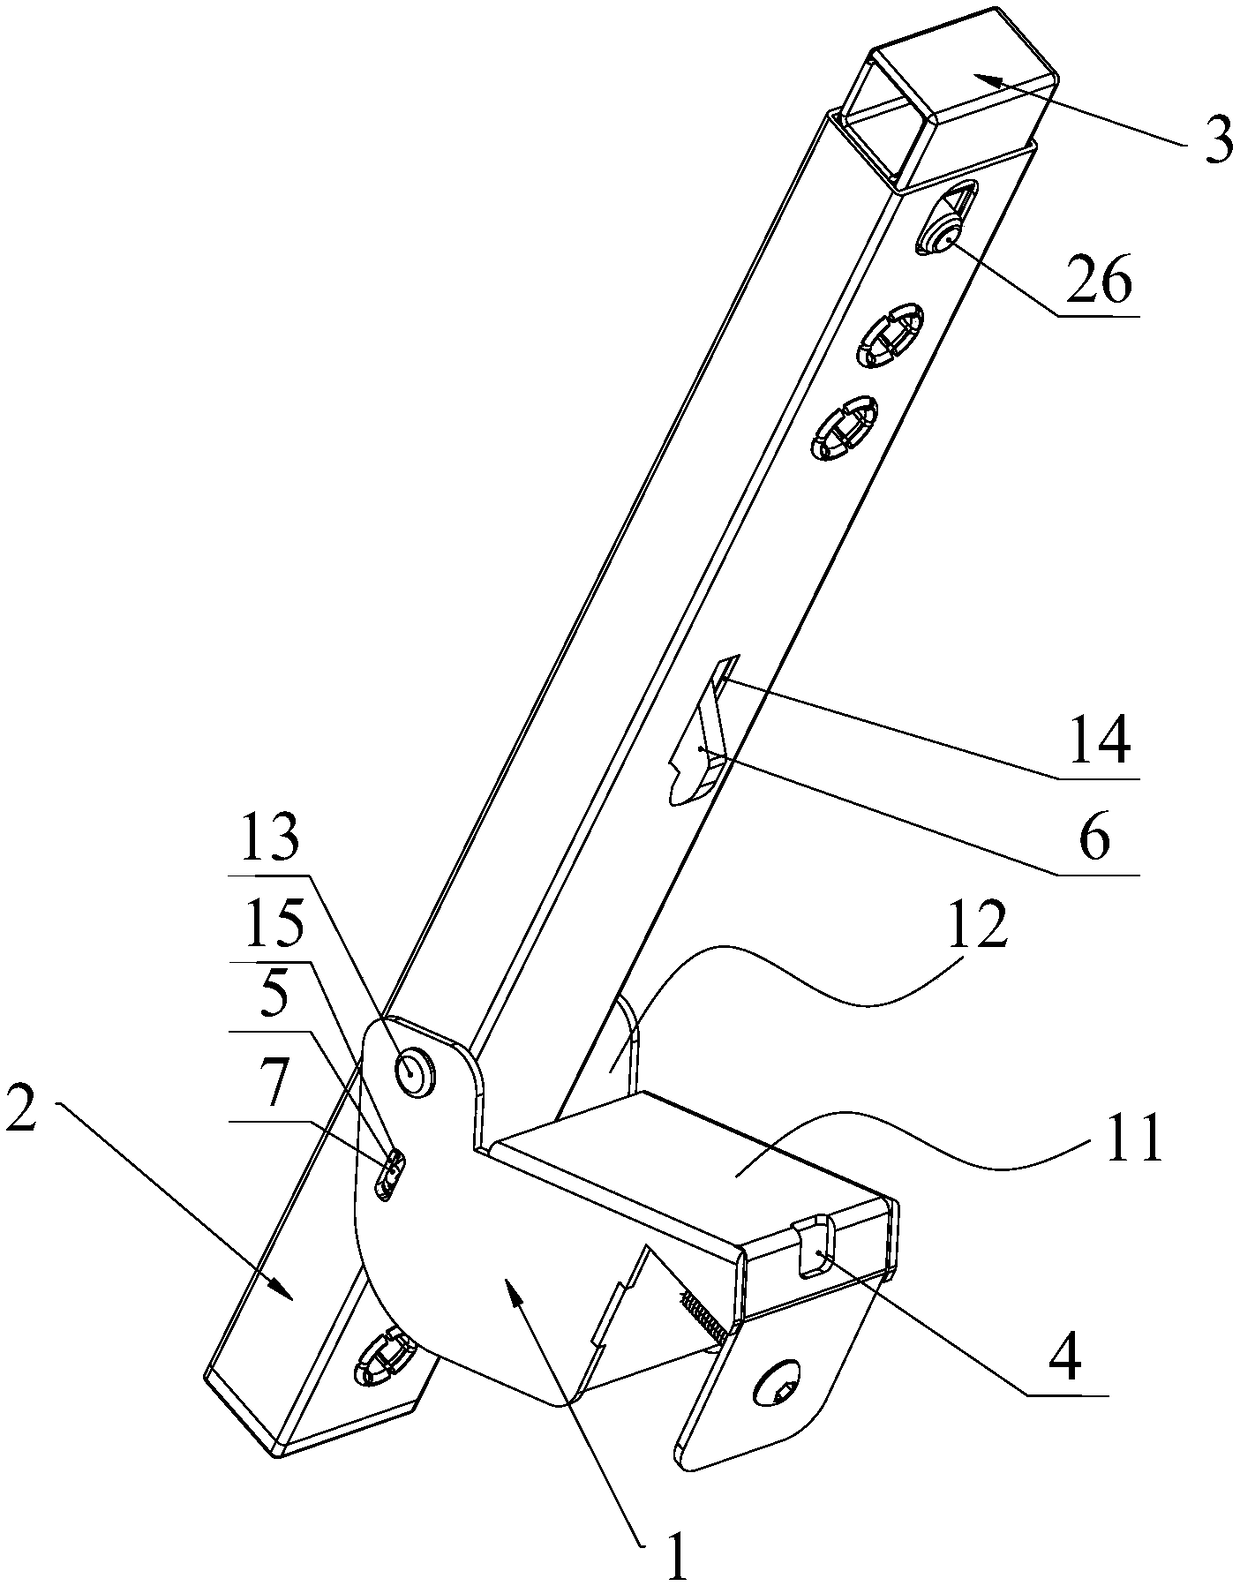 Turning mechanism and furniture